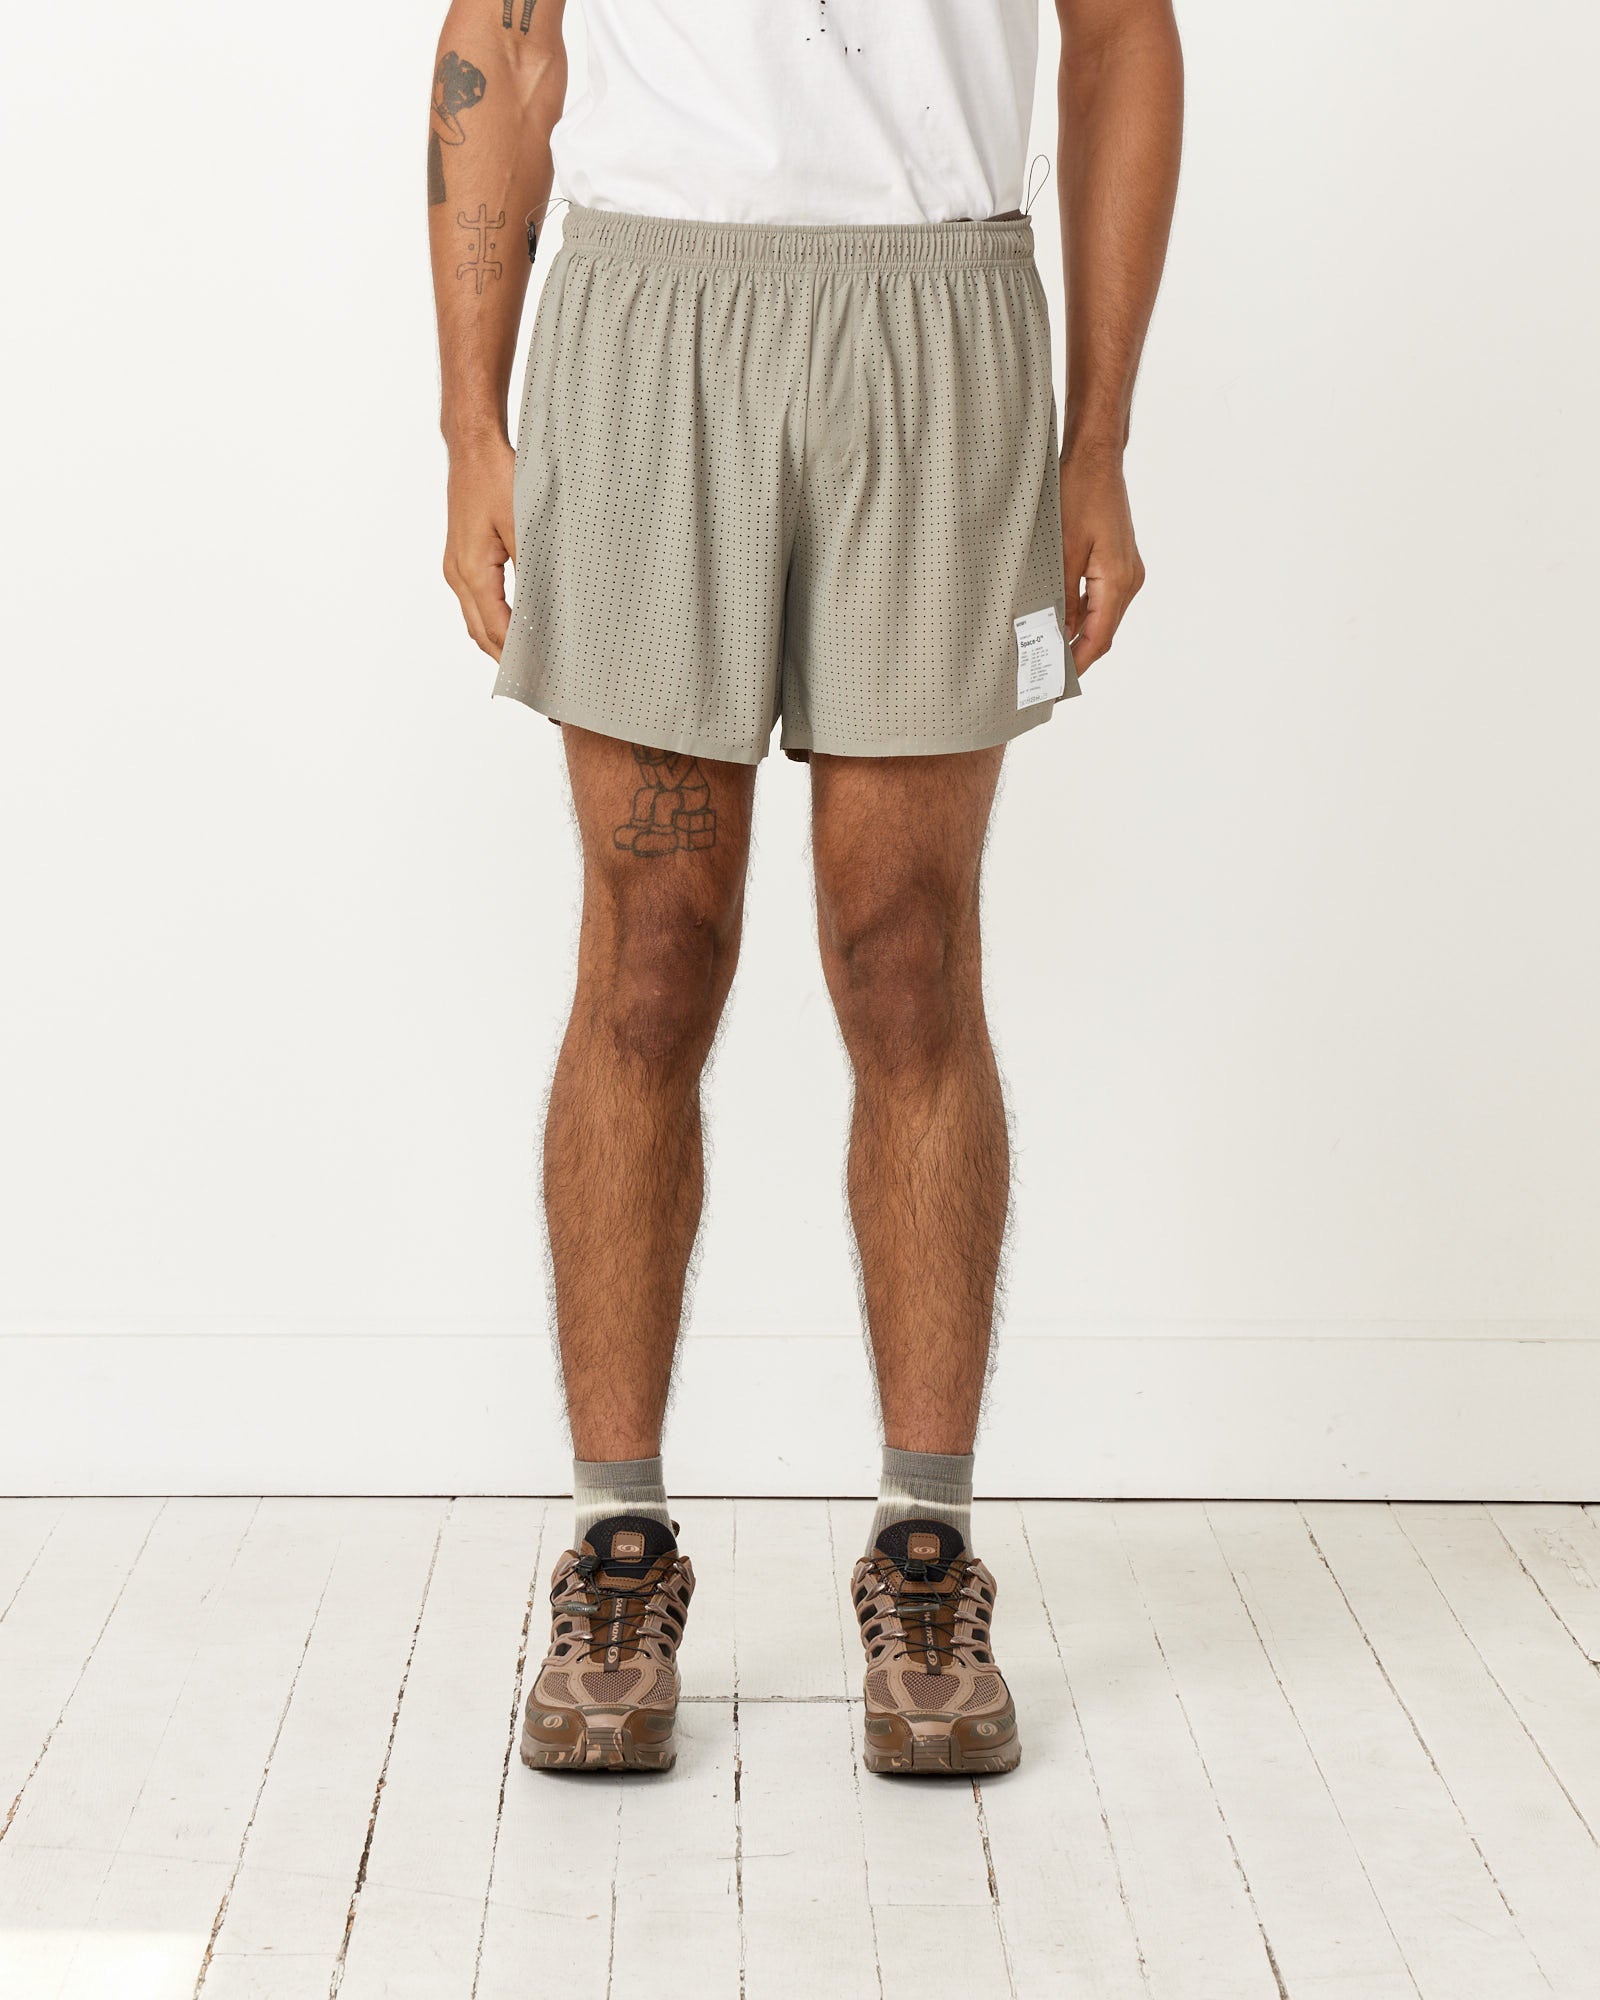 Space-O Shorts in Dry Sage